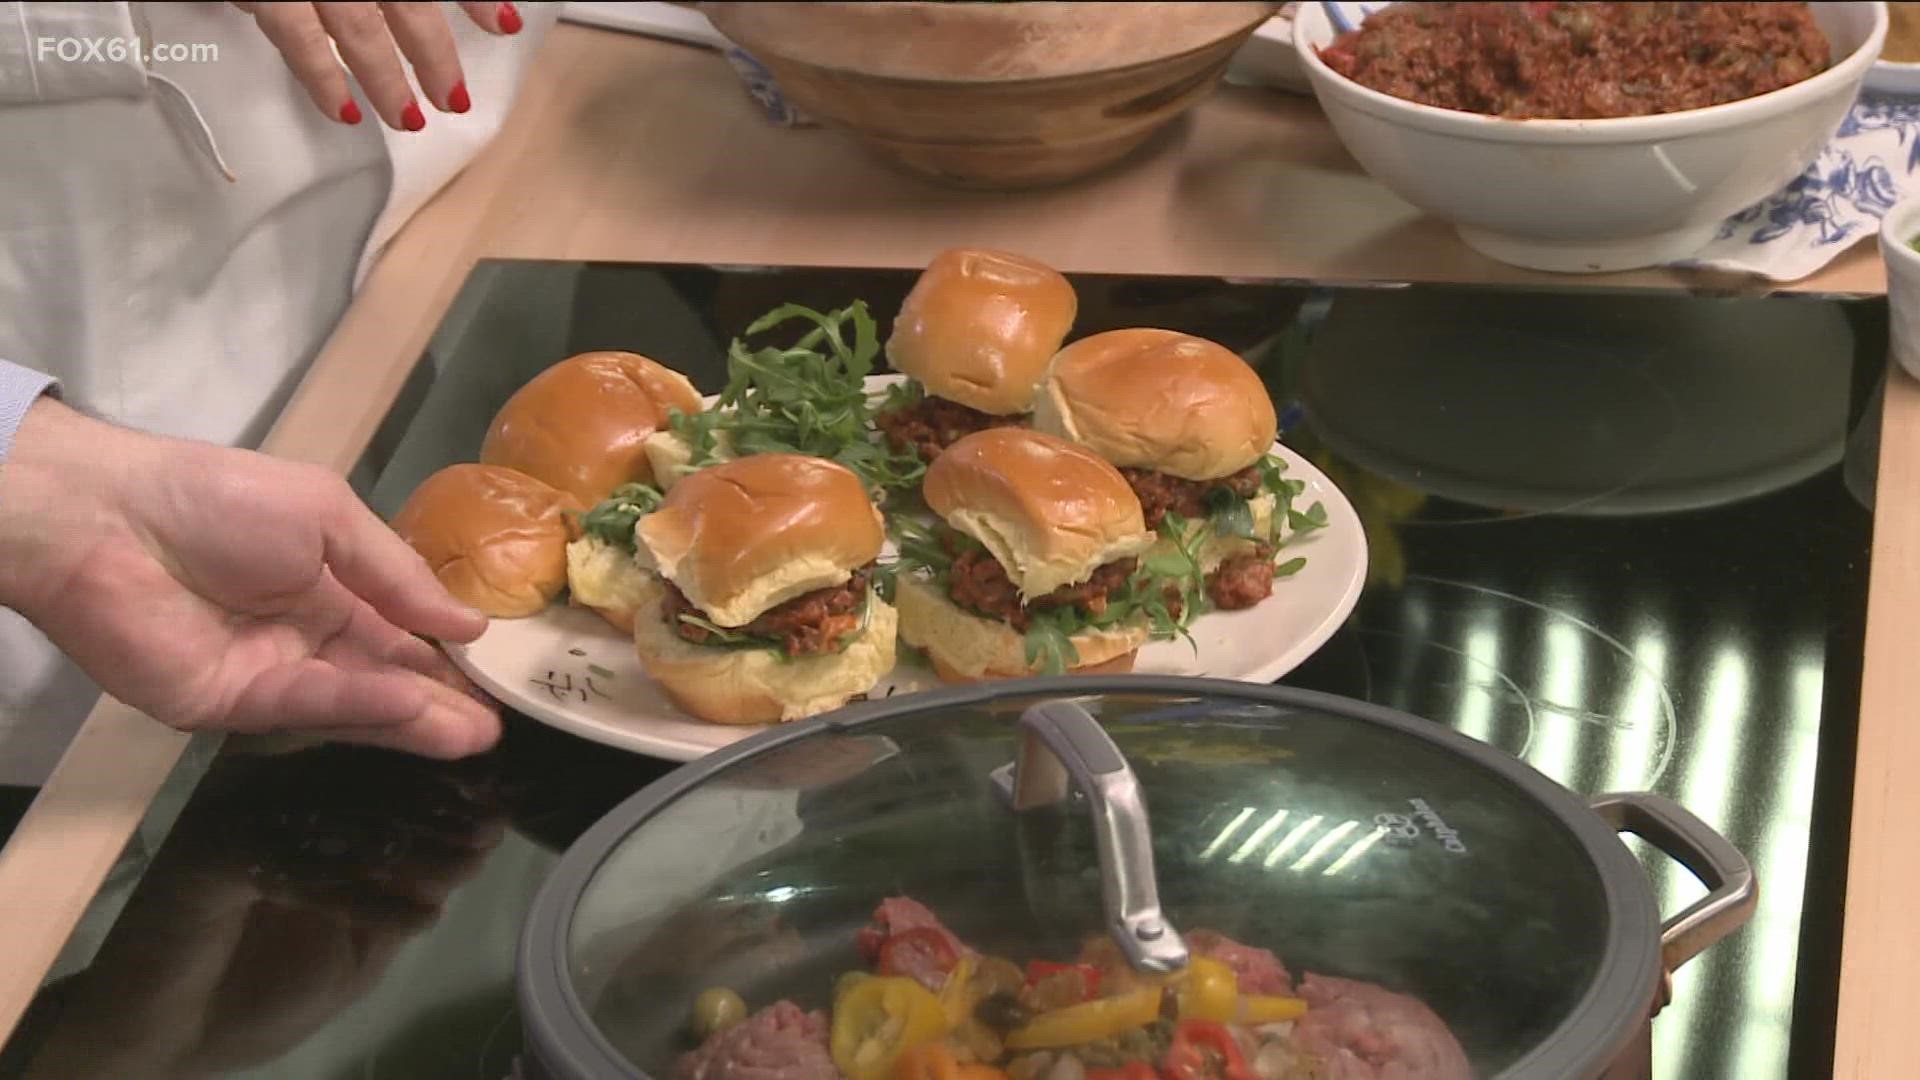 Chef Ani Robaina gives her take on a schoolhouse classic for National Sloppy Joe Day.